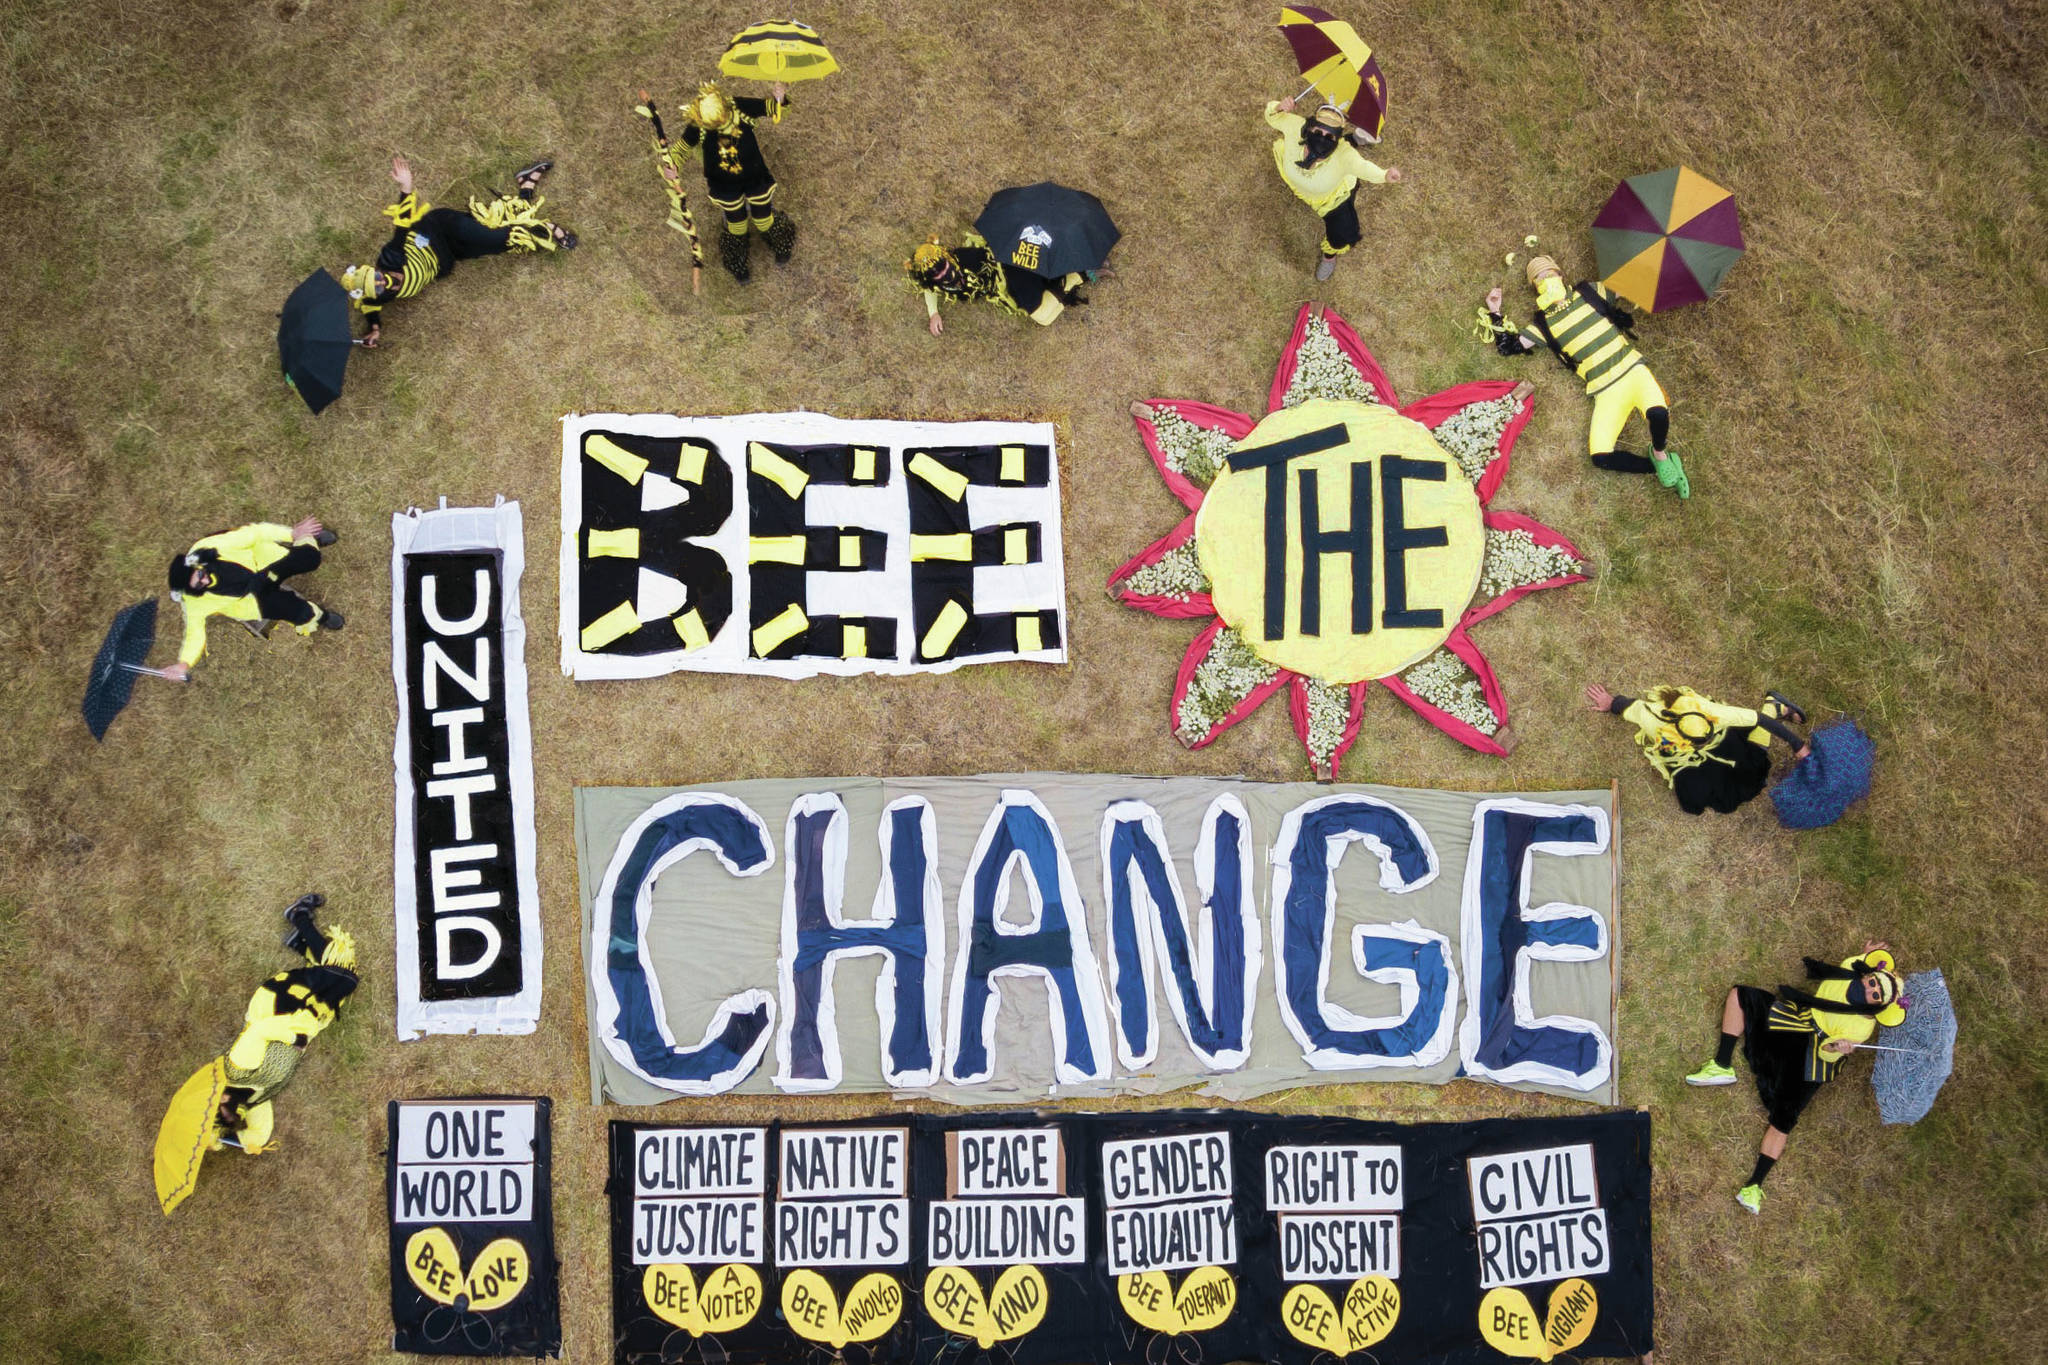 Artist organizes ‘bee the change’ project